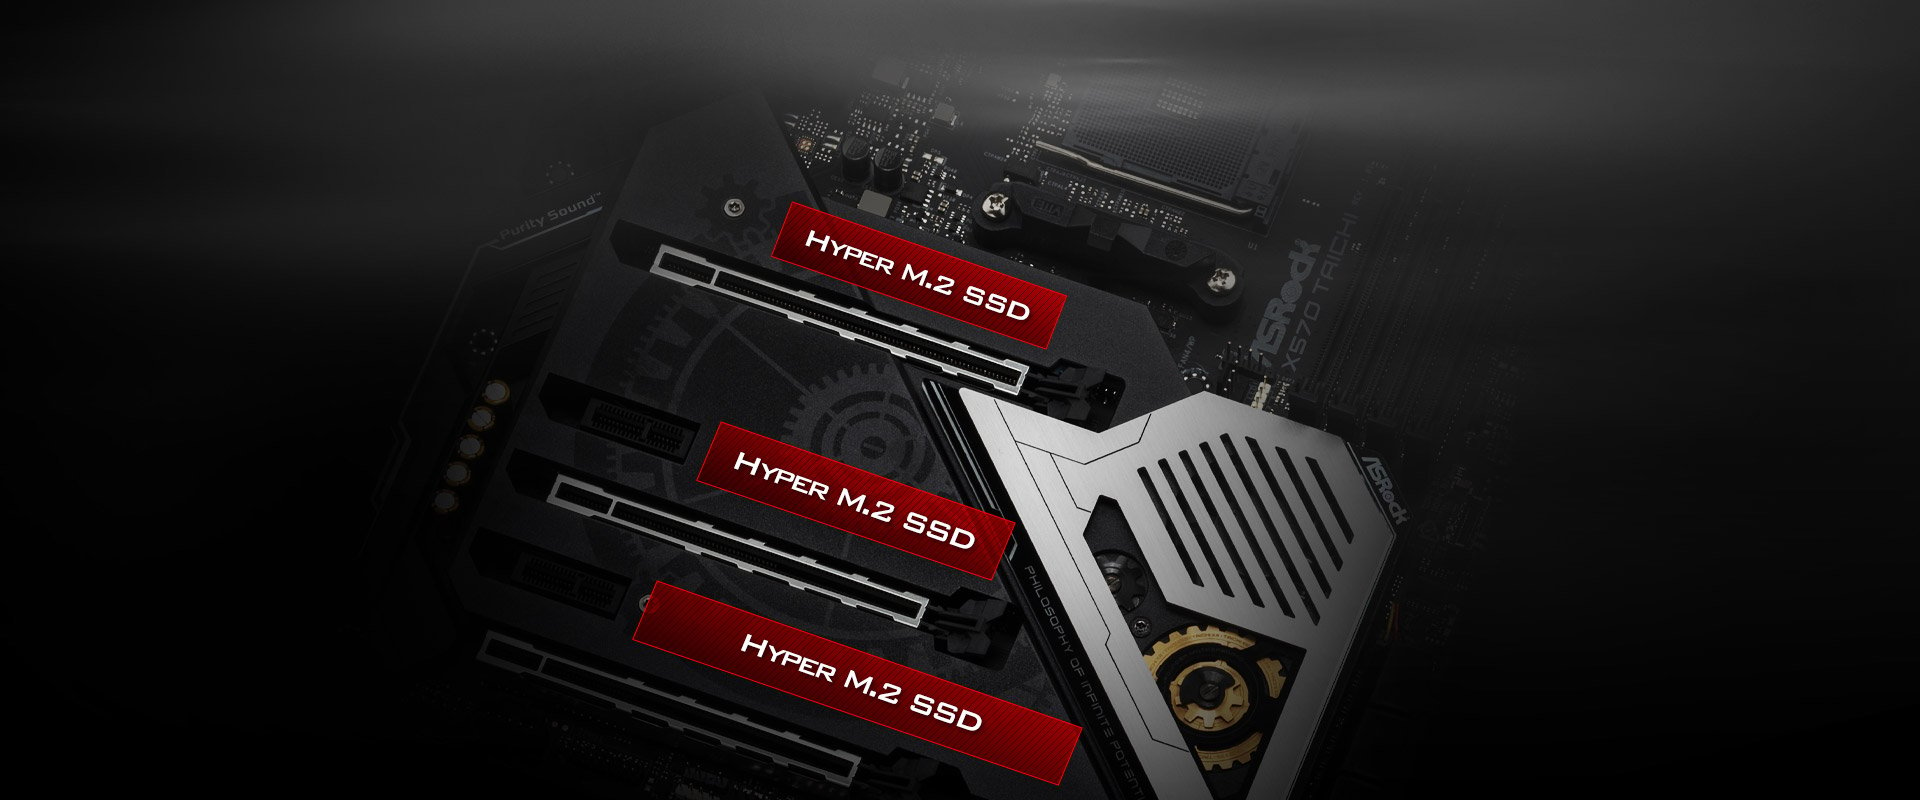 Highlight graphic showing the three M.2 slots on the ASRock X570 Taichi Motherboard, with the third bottom one being Hyper M.2